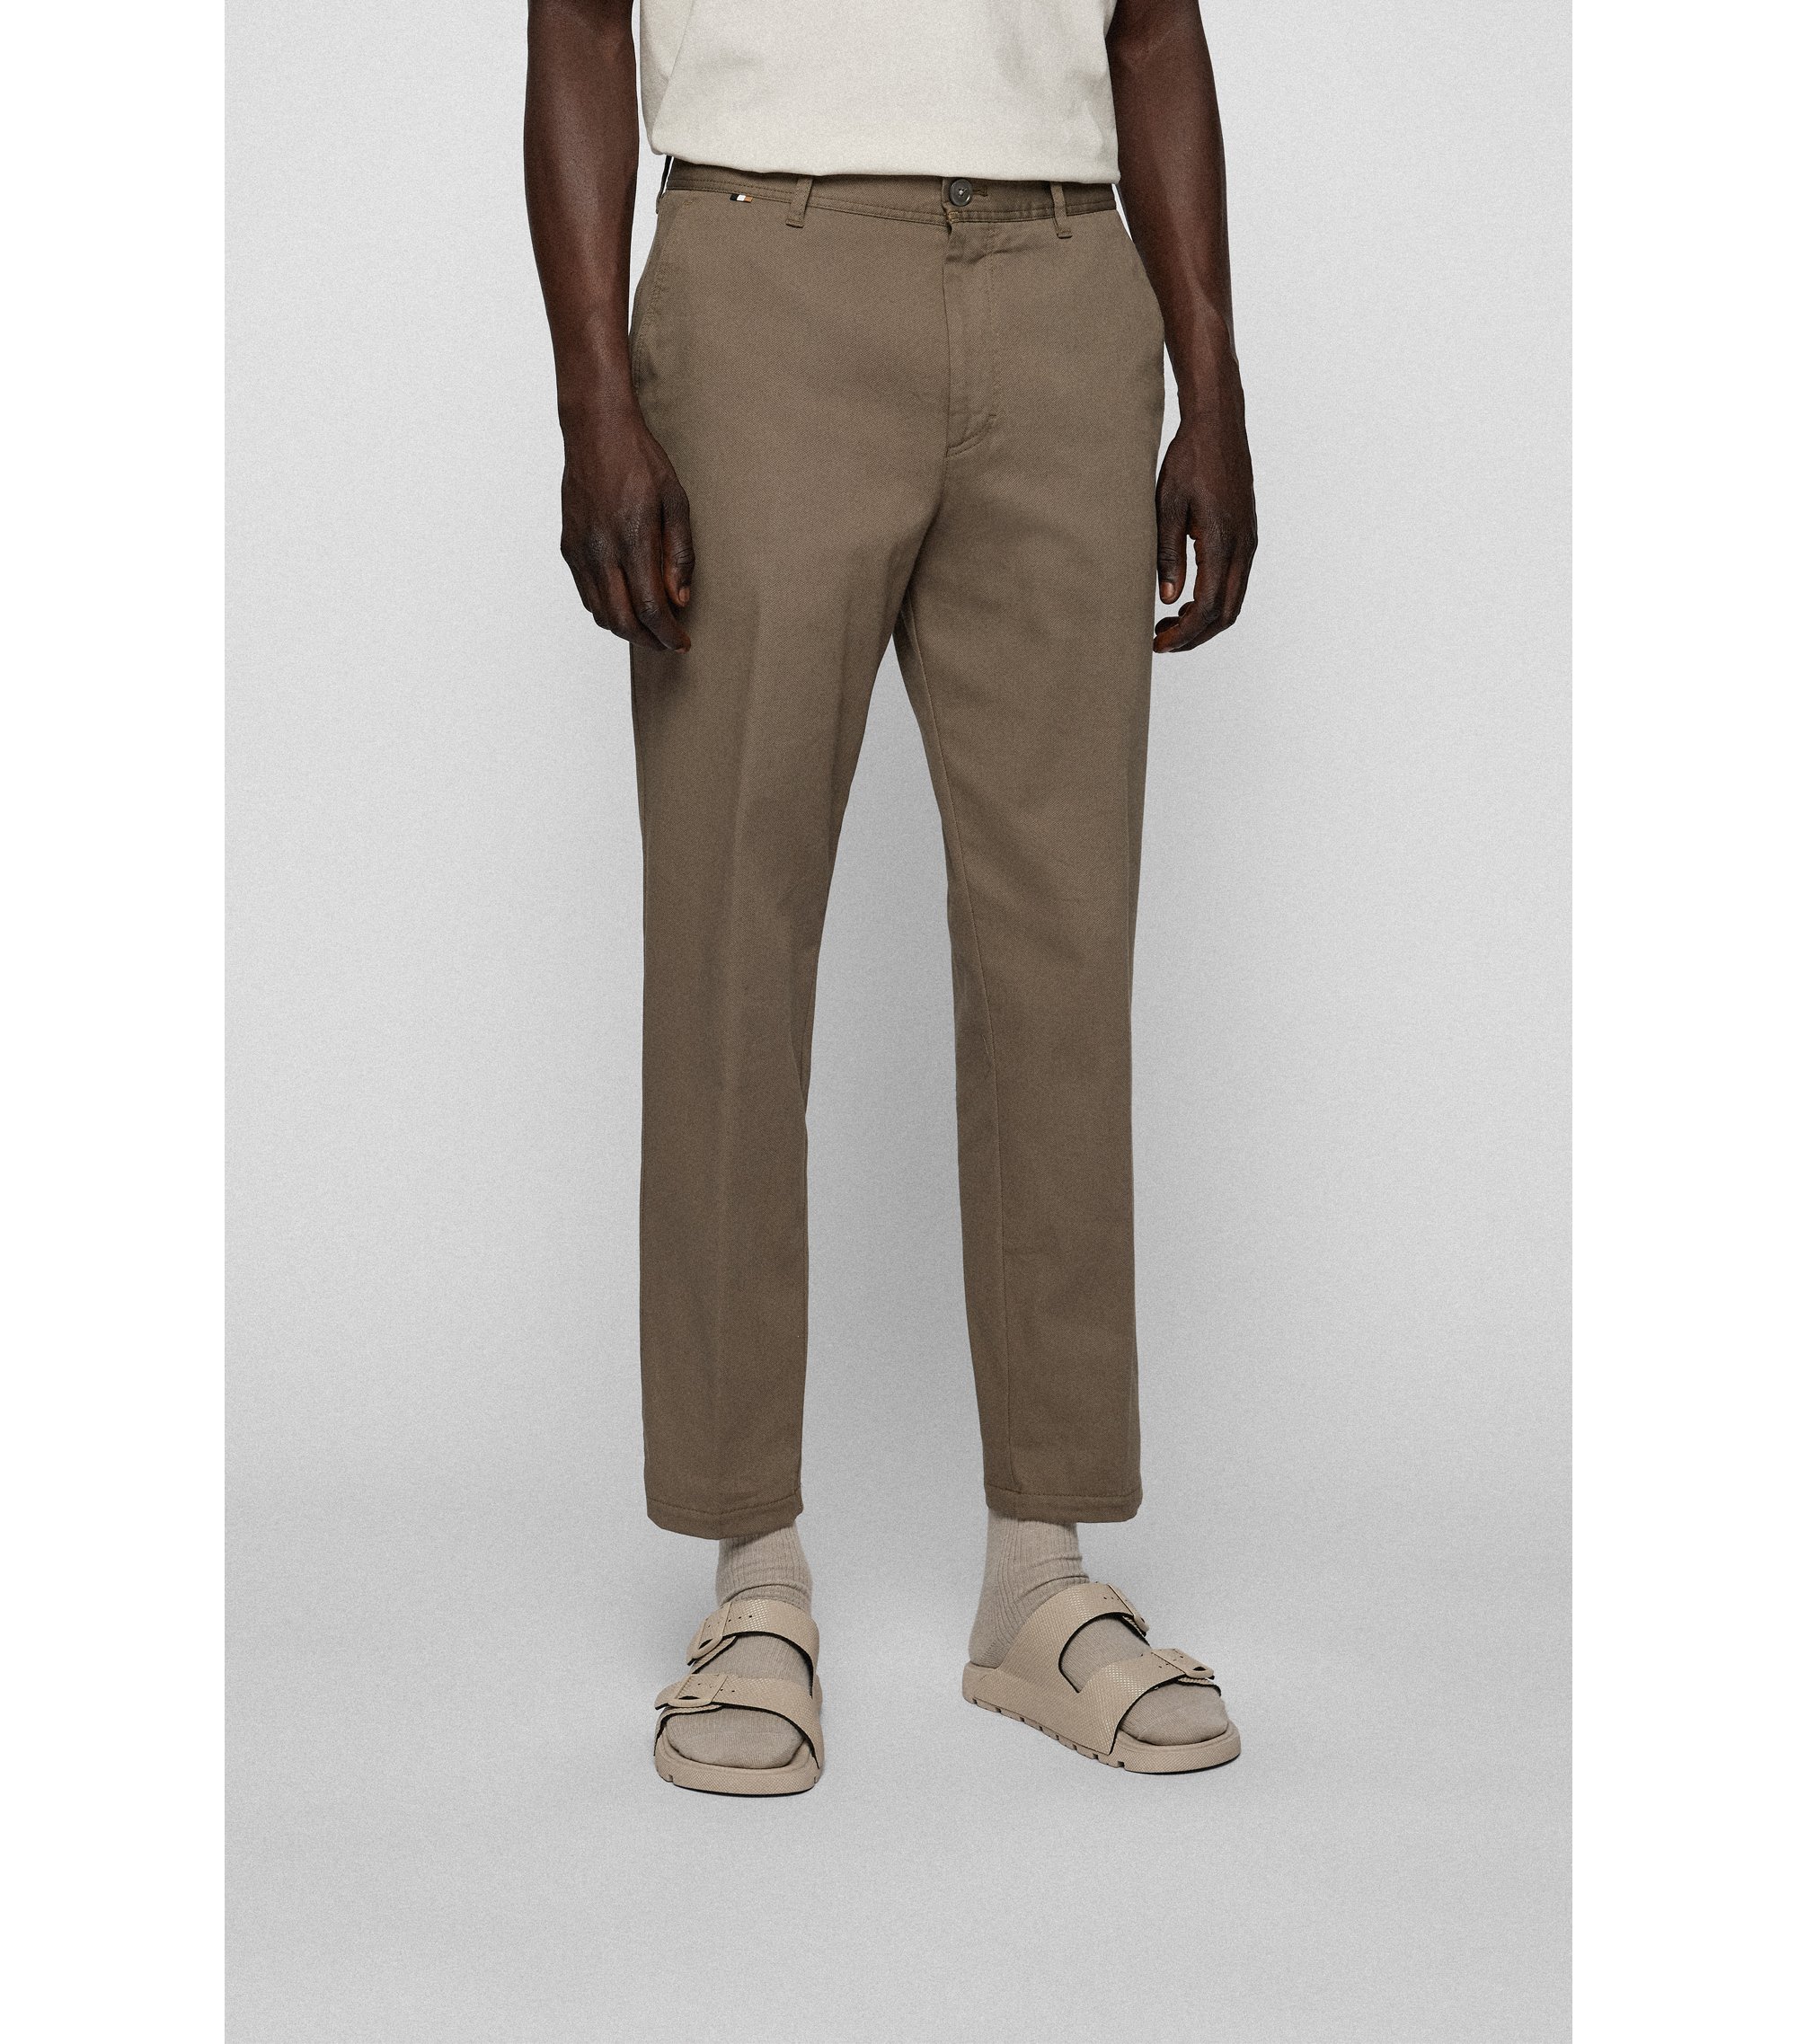 NEW MEN'S TRAVEL CHINOS TROUSERS MARKS & SPENCER NATURAL ITALIAN WOVEN COTTON